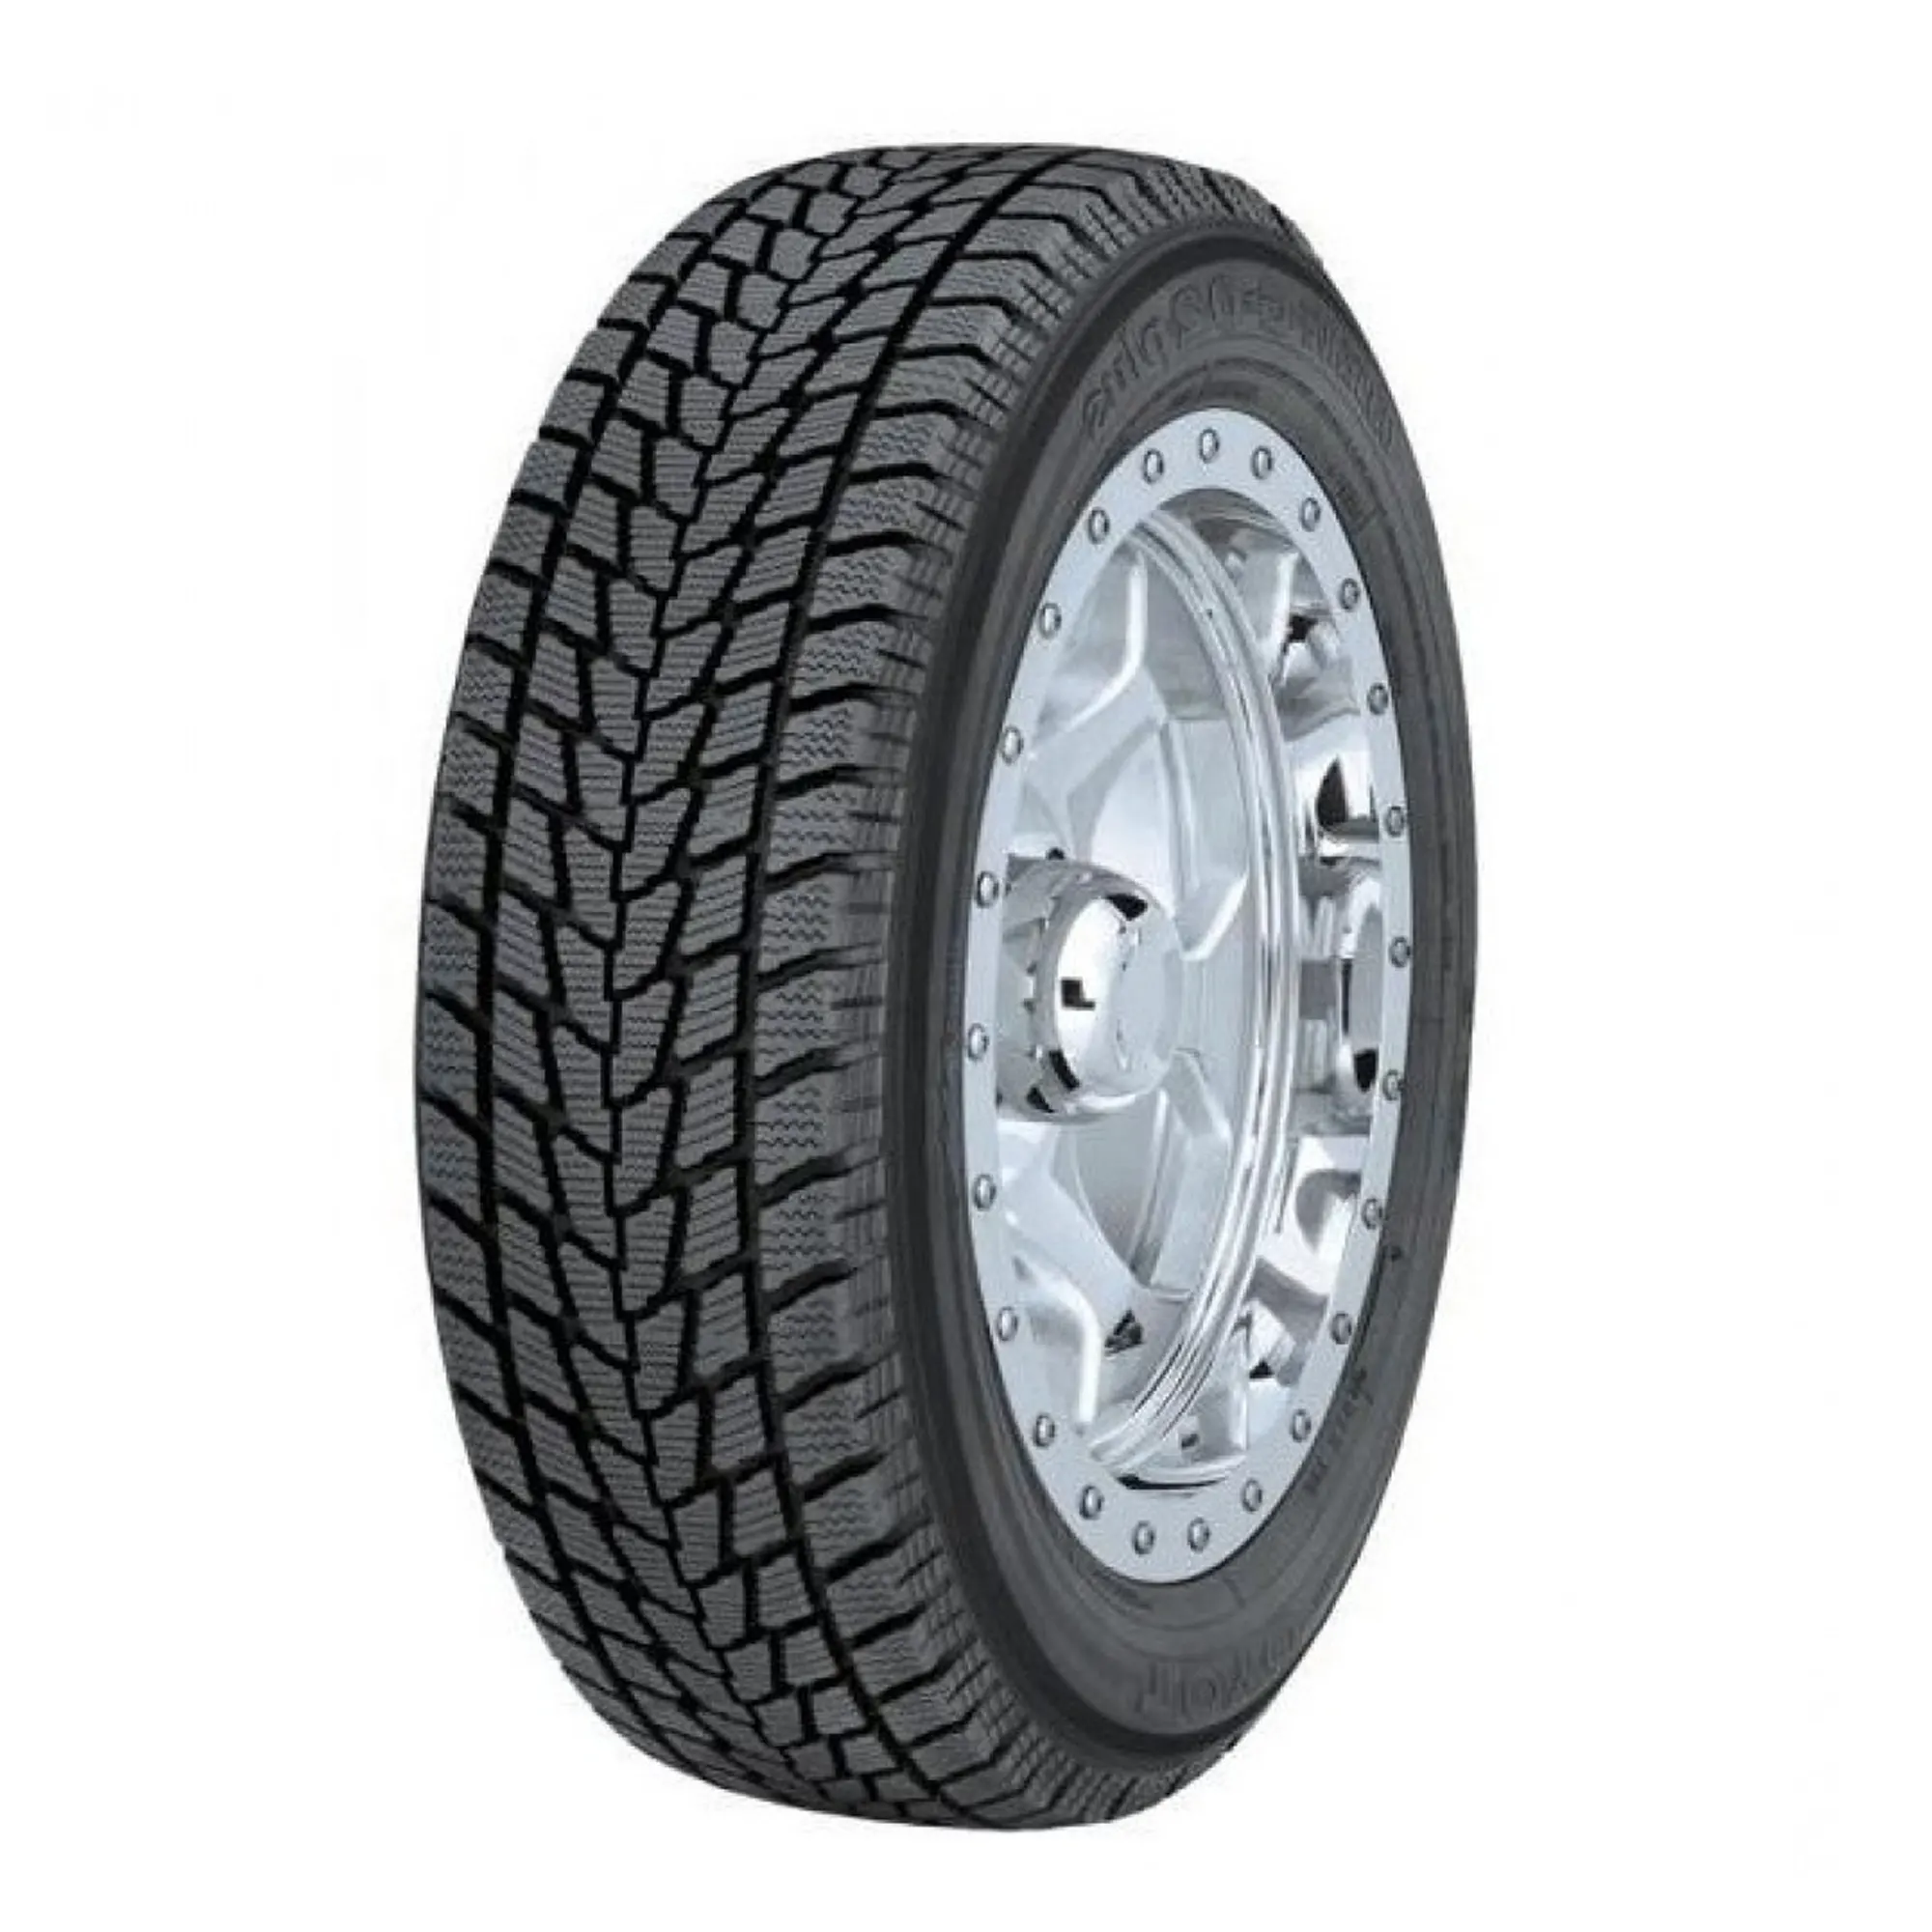 Шина 245/70R17 119/116Q Open Country G02+